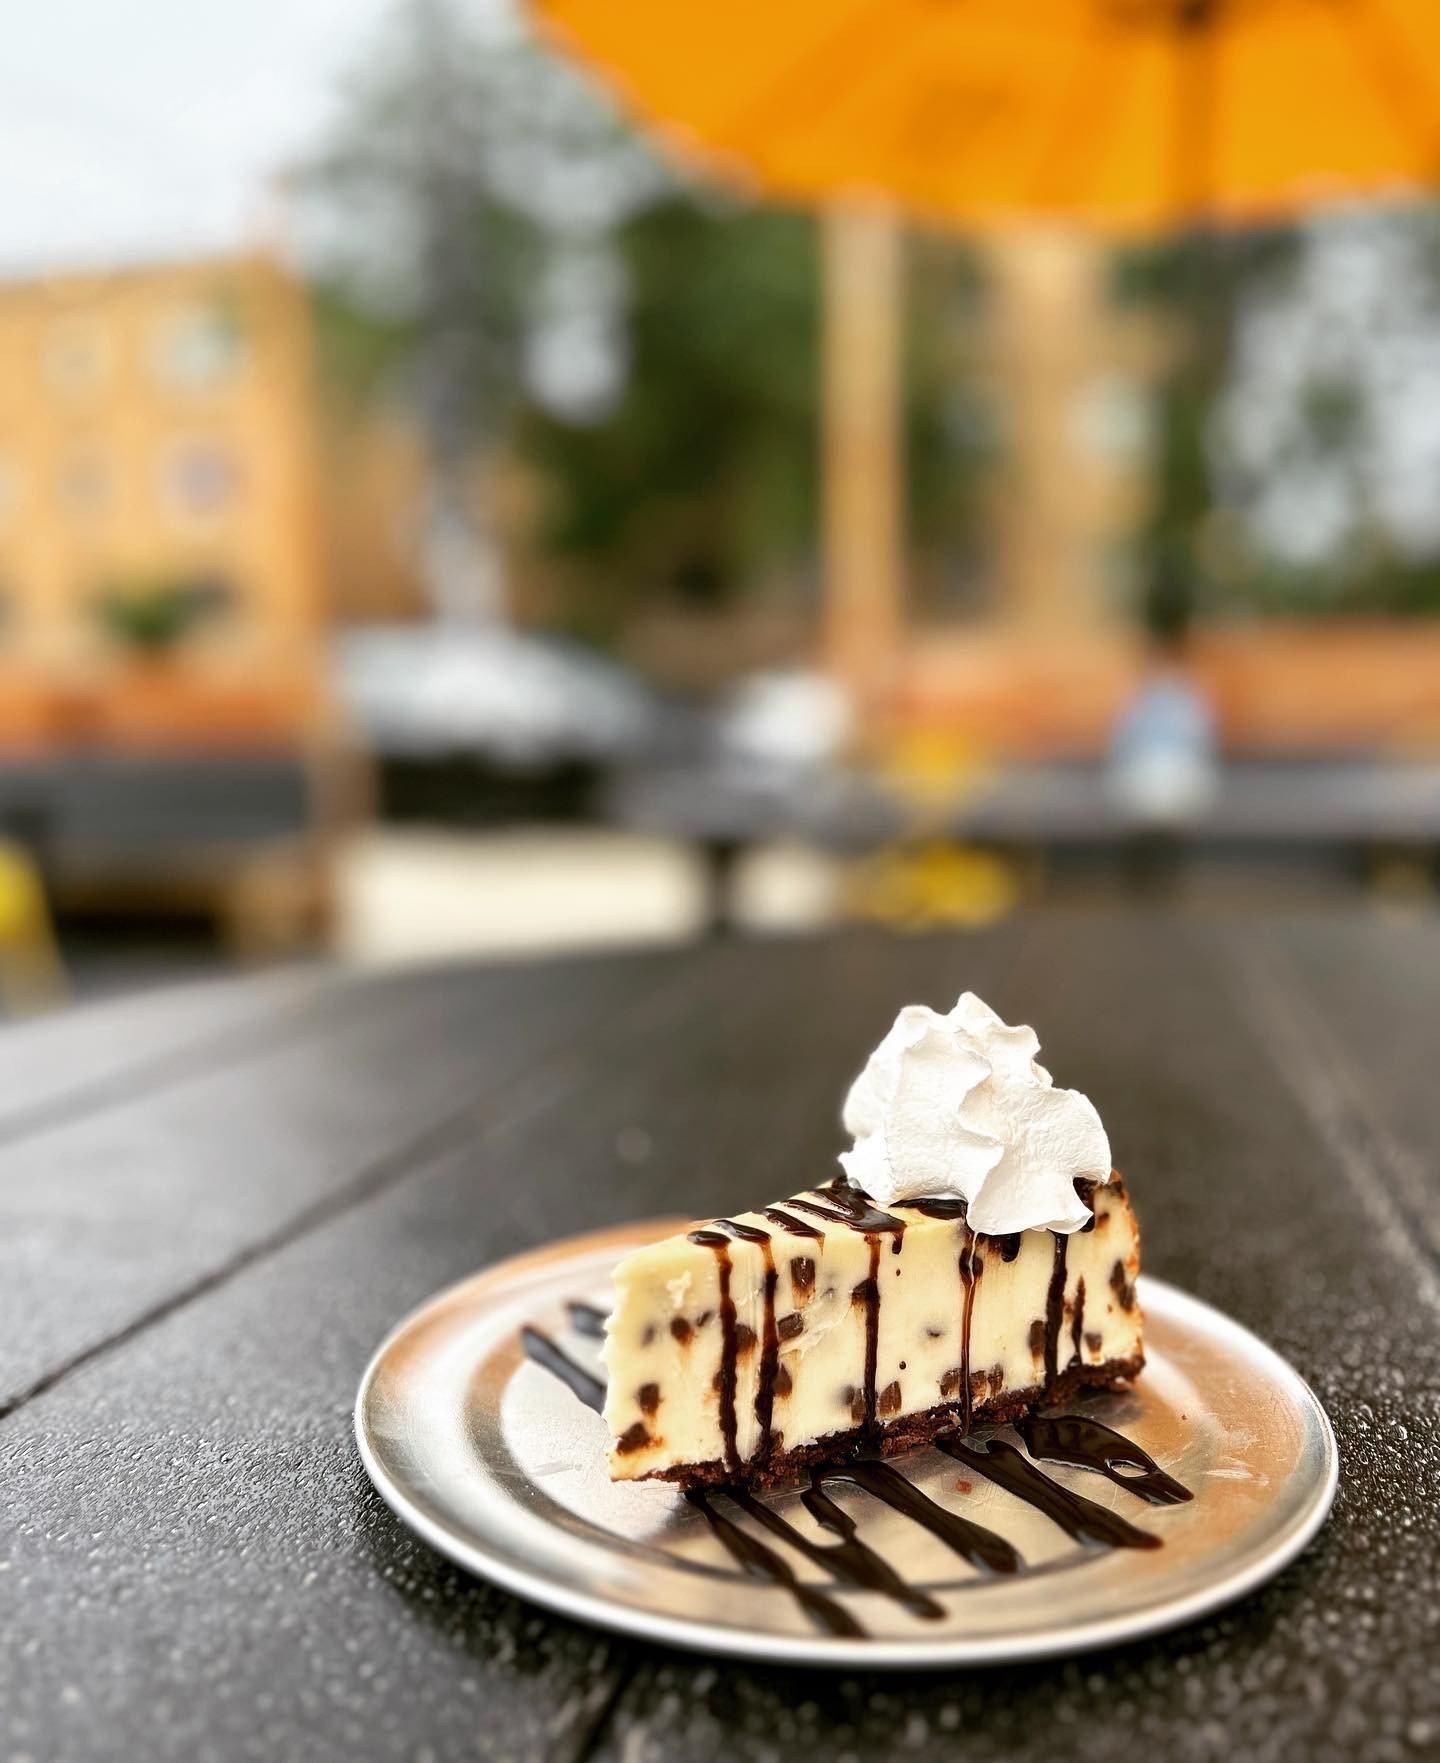 The Cubs are on at 6:40 tonight! Come on out to Moonlighter and treat yourself to some cheesecake on the patio. Sounds like the perfect evening to us! We&rsquo;re open 5pm-Midnight.⁠
⁠
#logansquare #burgers #beer #craftbeer #beerbar #draftbeer #burge